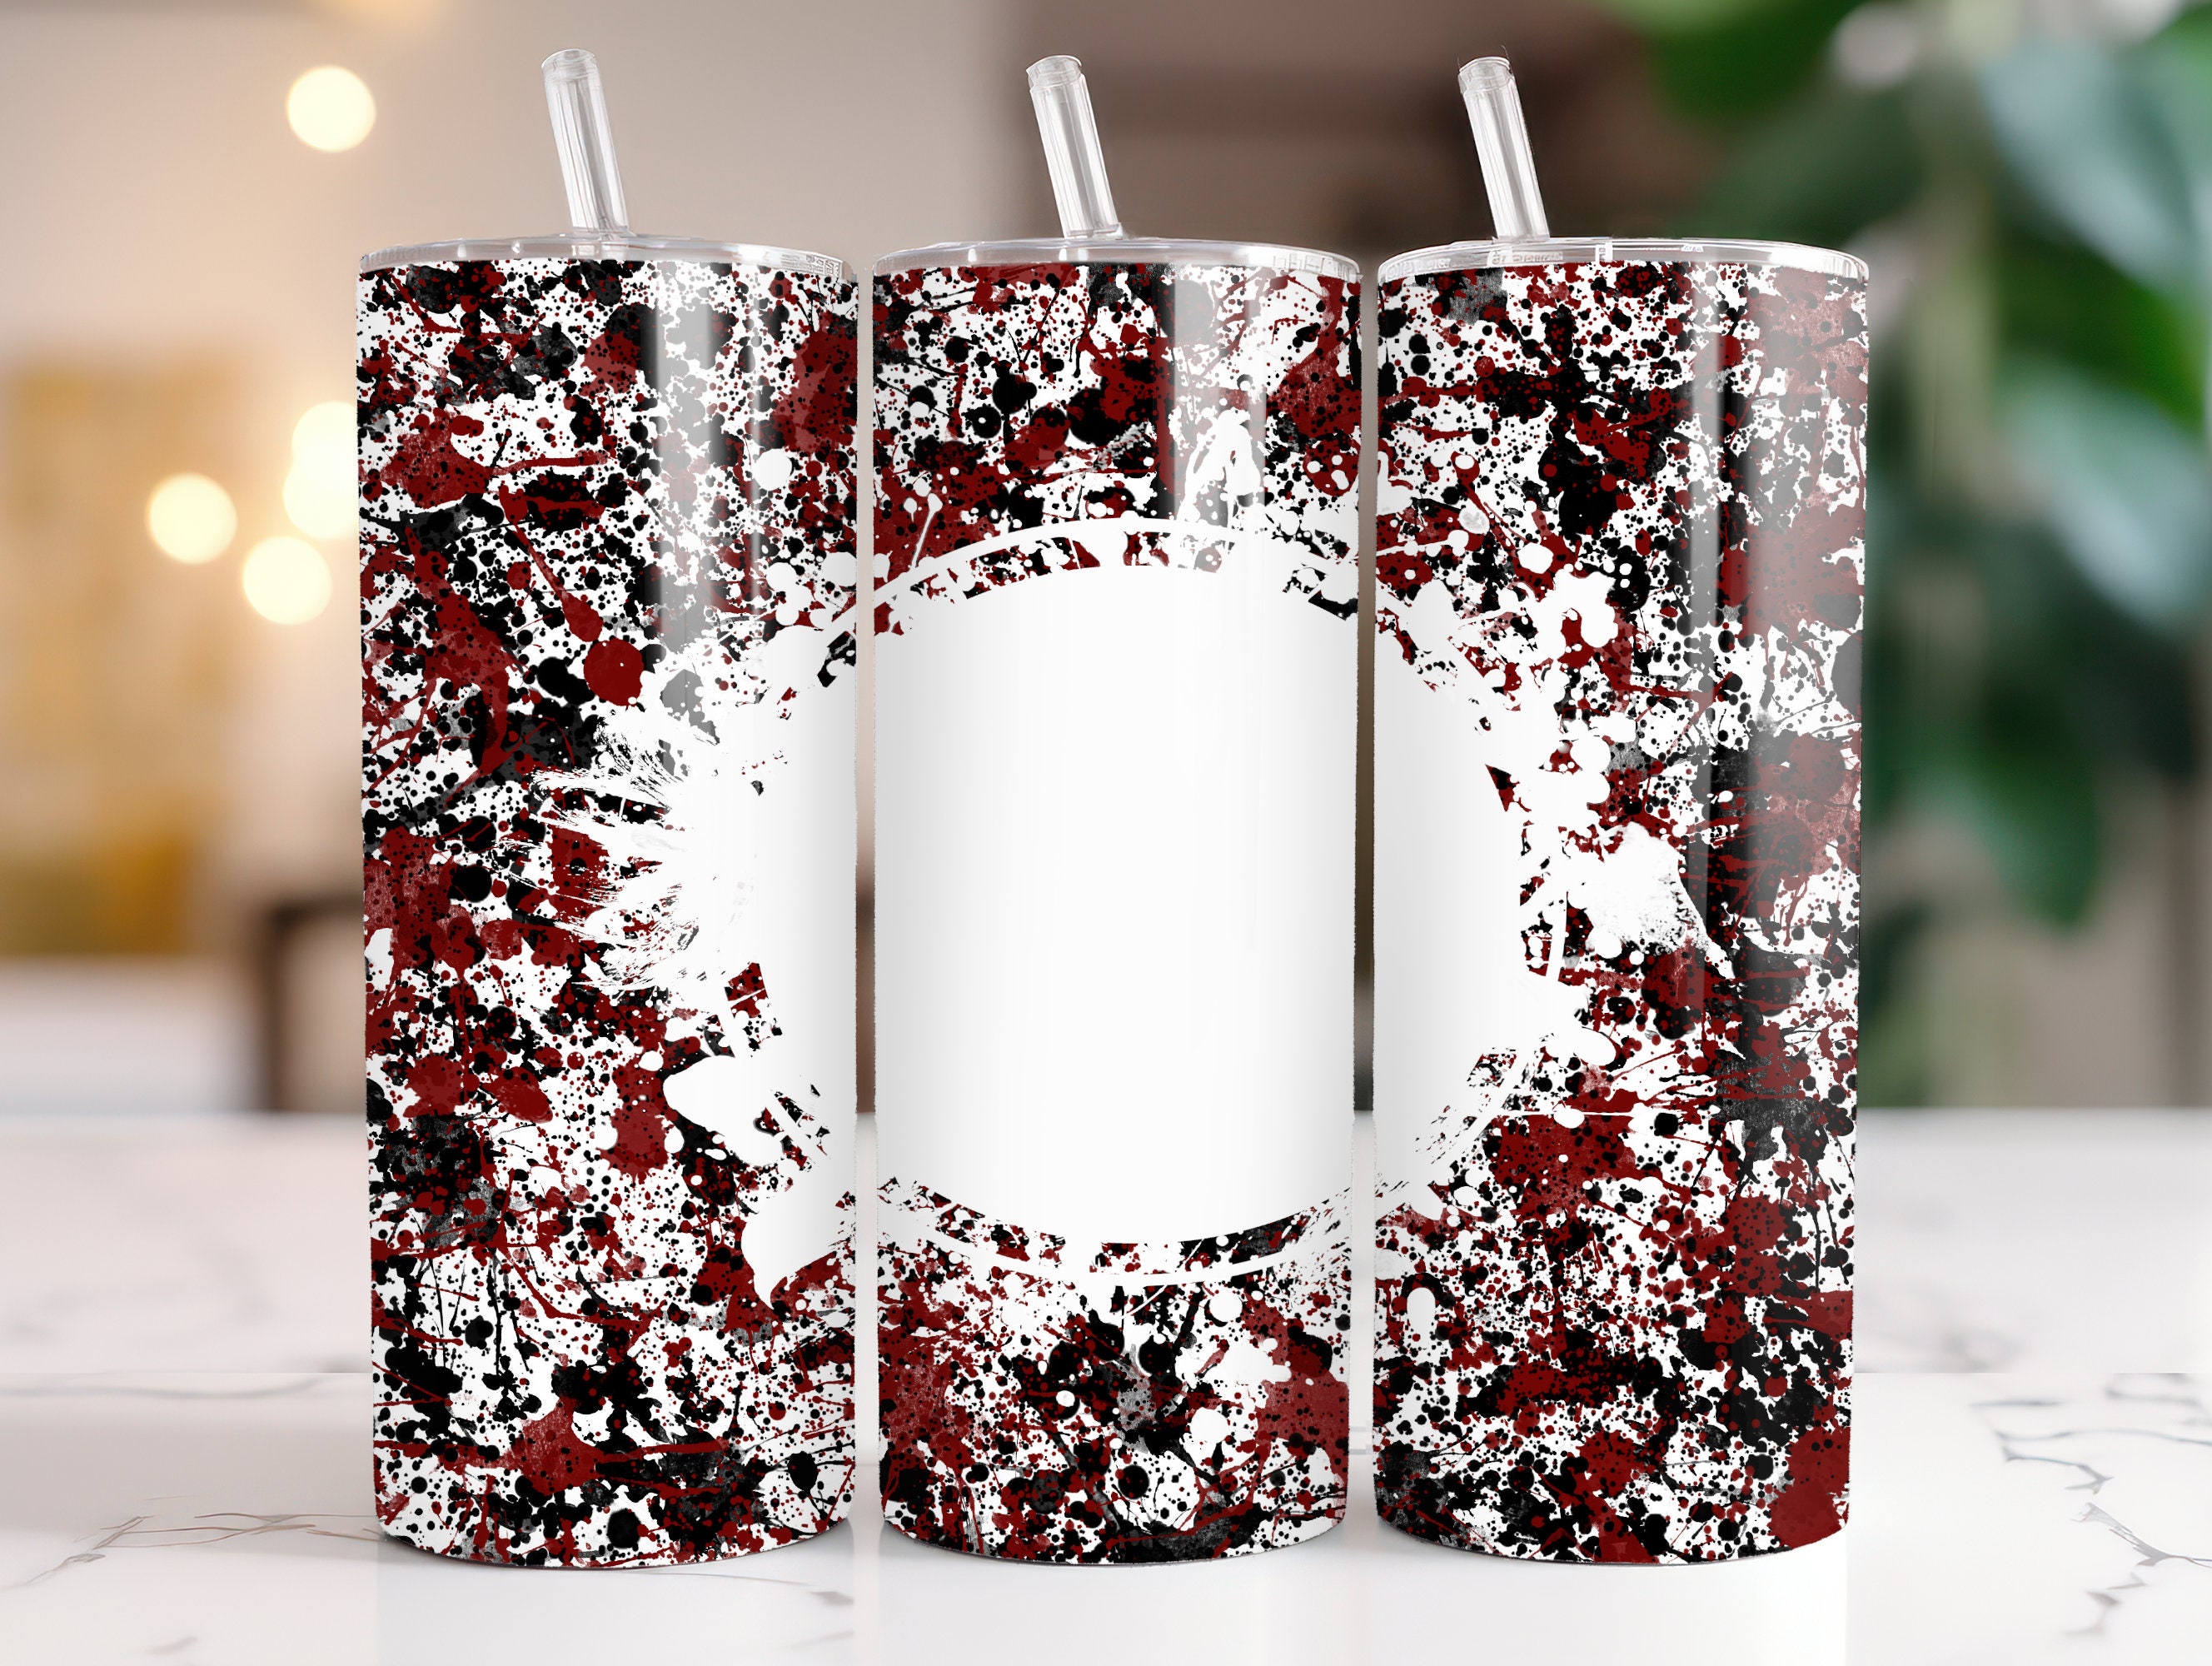 Be Burgundy Personalized Tumbler with Engraved Name - 12 Designs, 20 Oz  Coffee Tumbler with Slider L…See more Be Burgundy Personalized Tumbler with